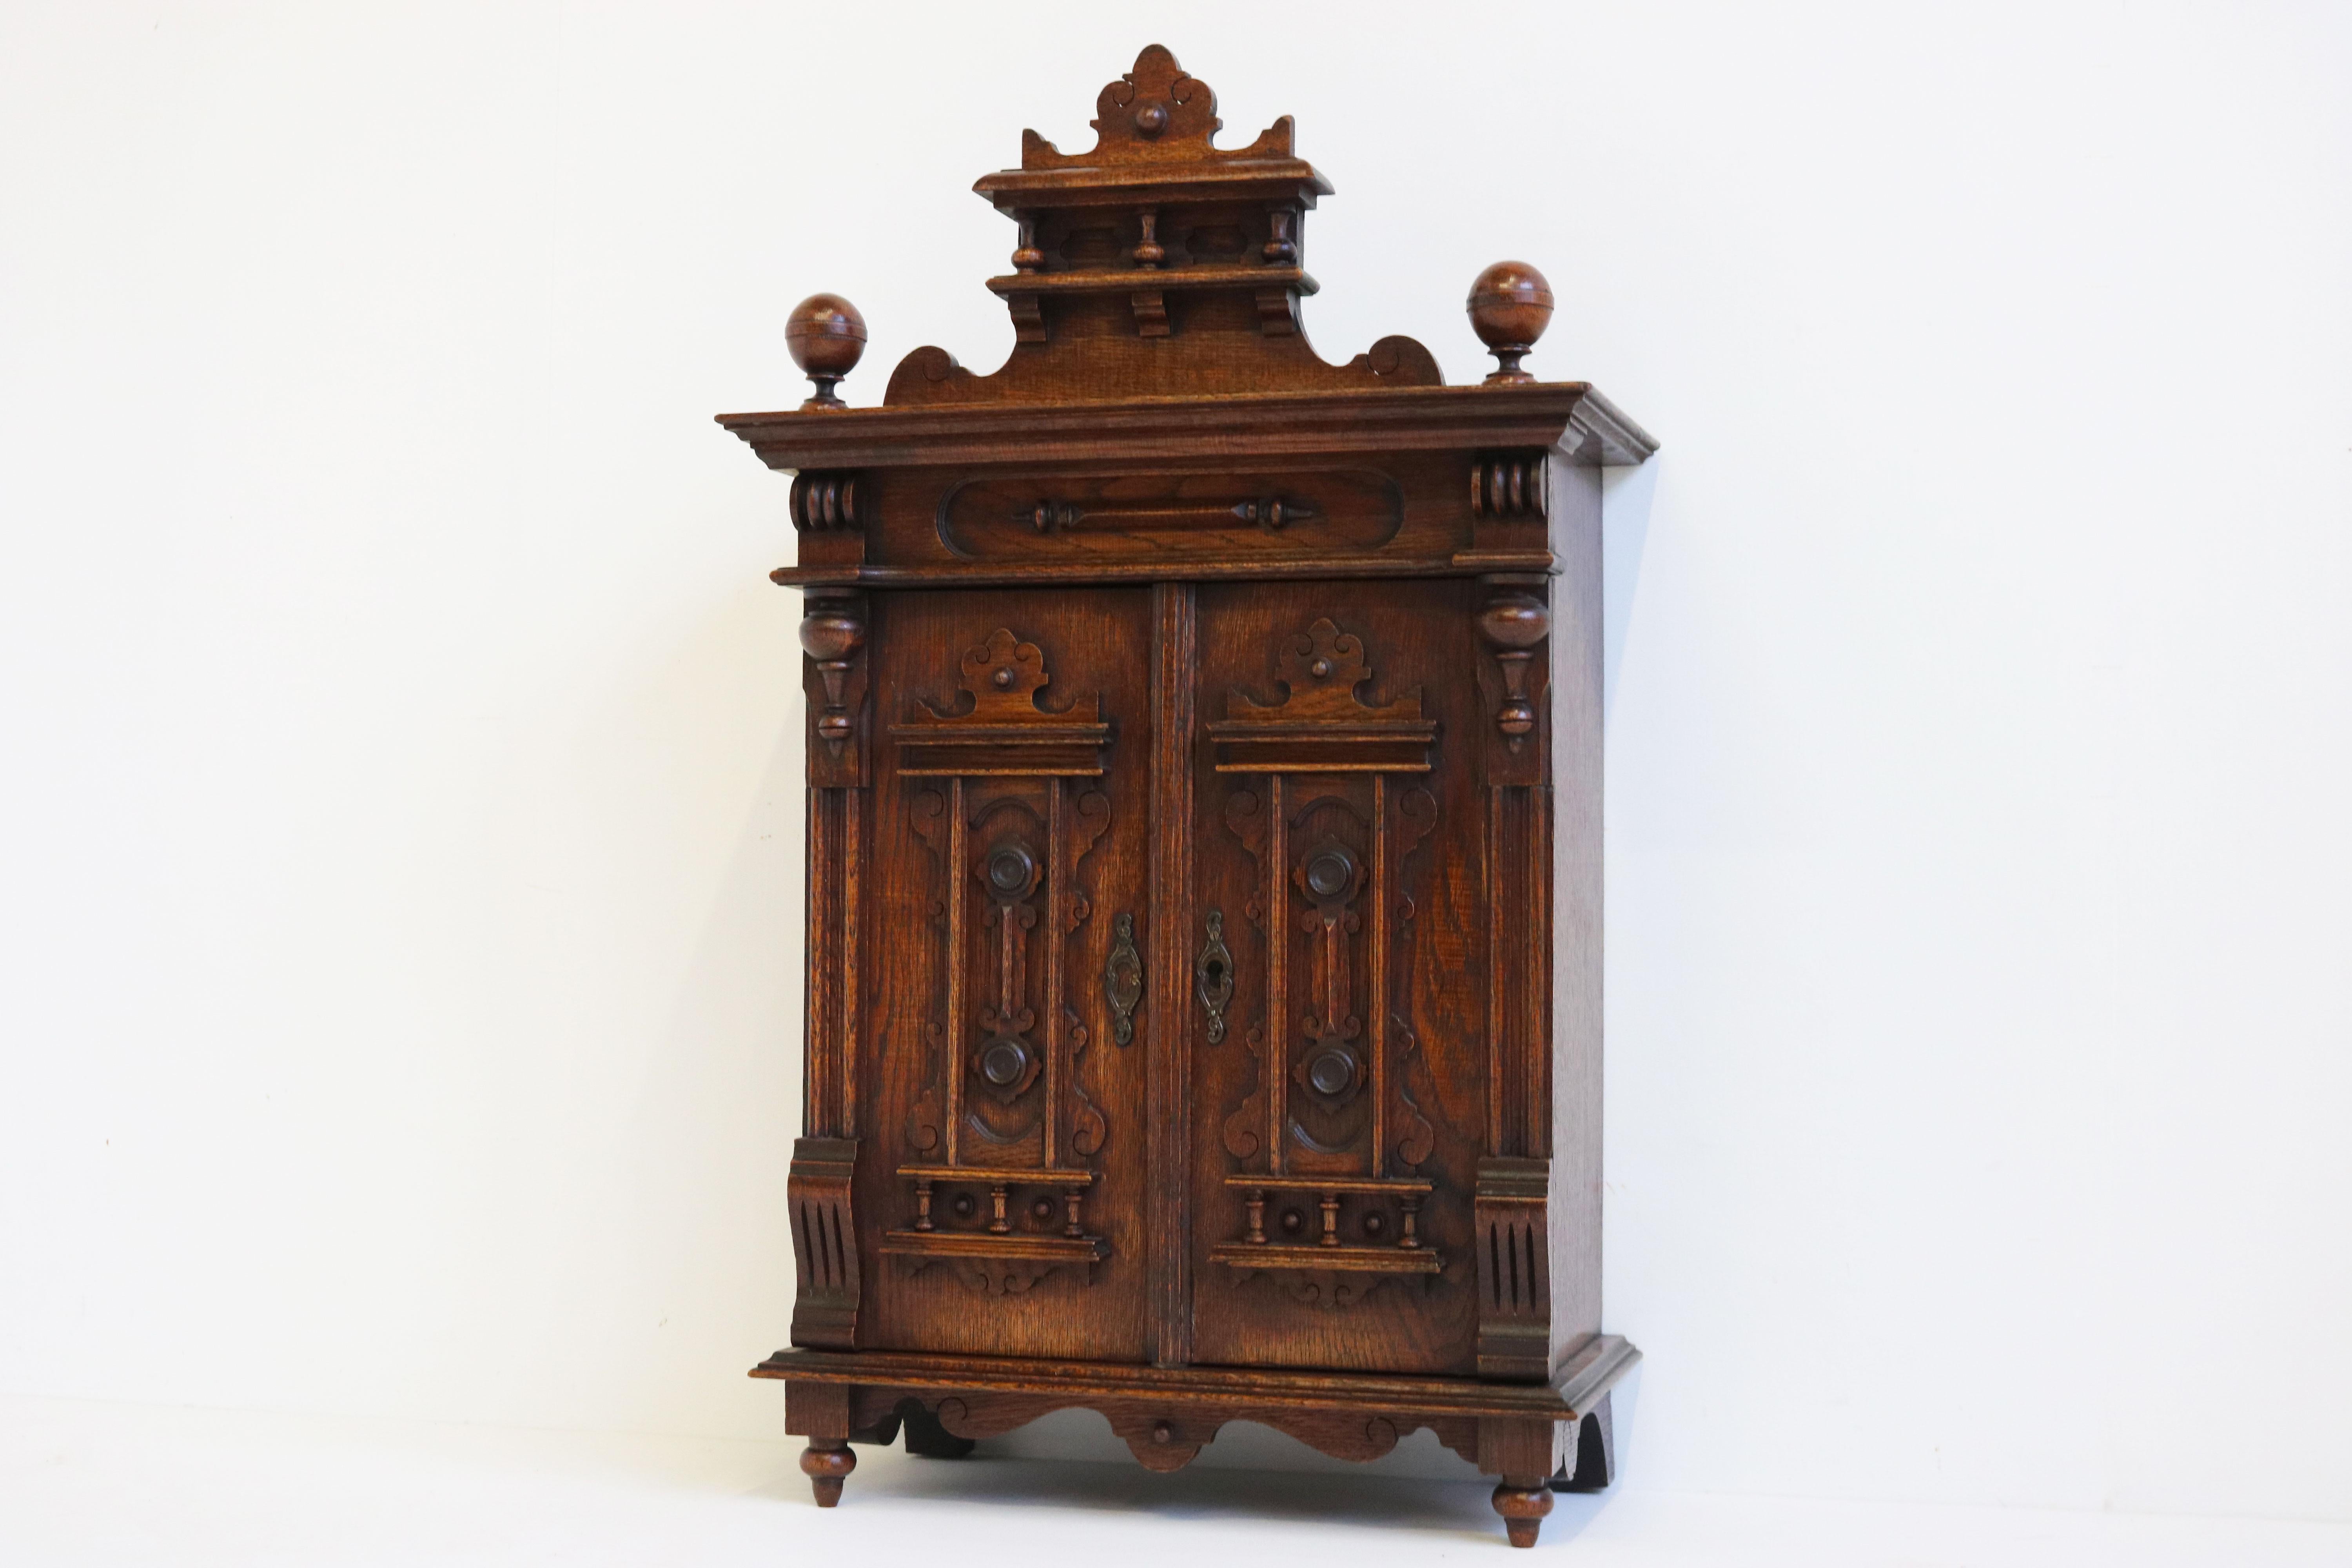 Neoclassical Revival Antique 19th Century German Grunderzeit Wall Cabinet / Small Cabinet Carved Oak For Sale